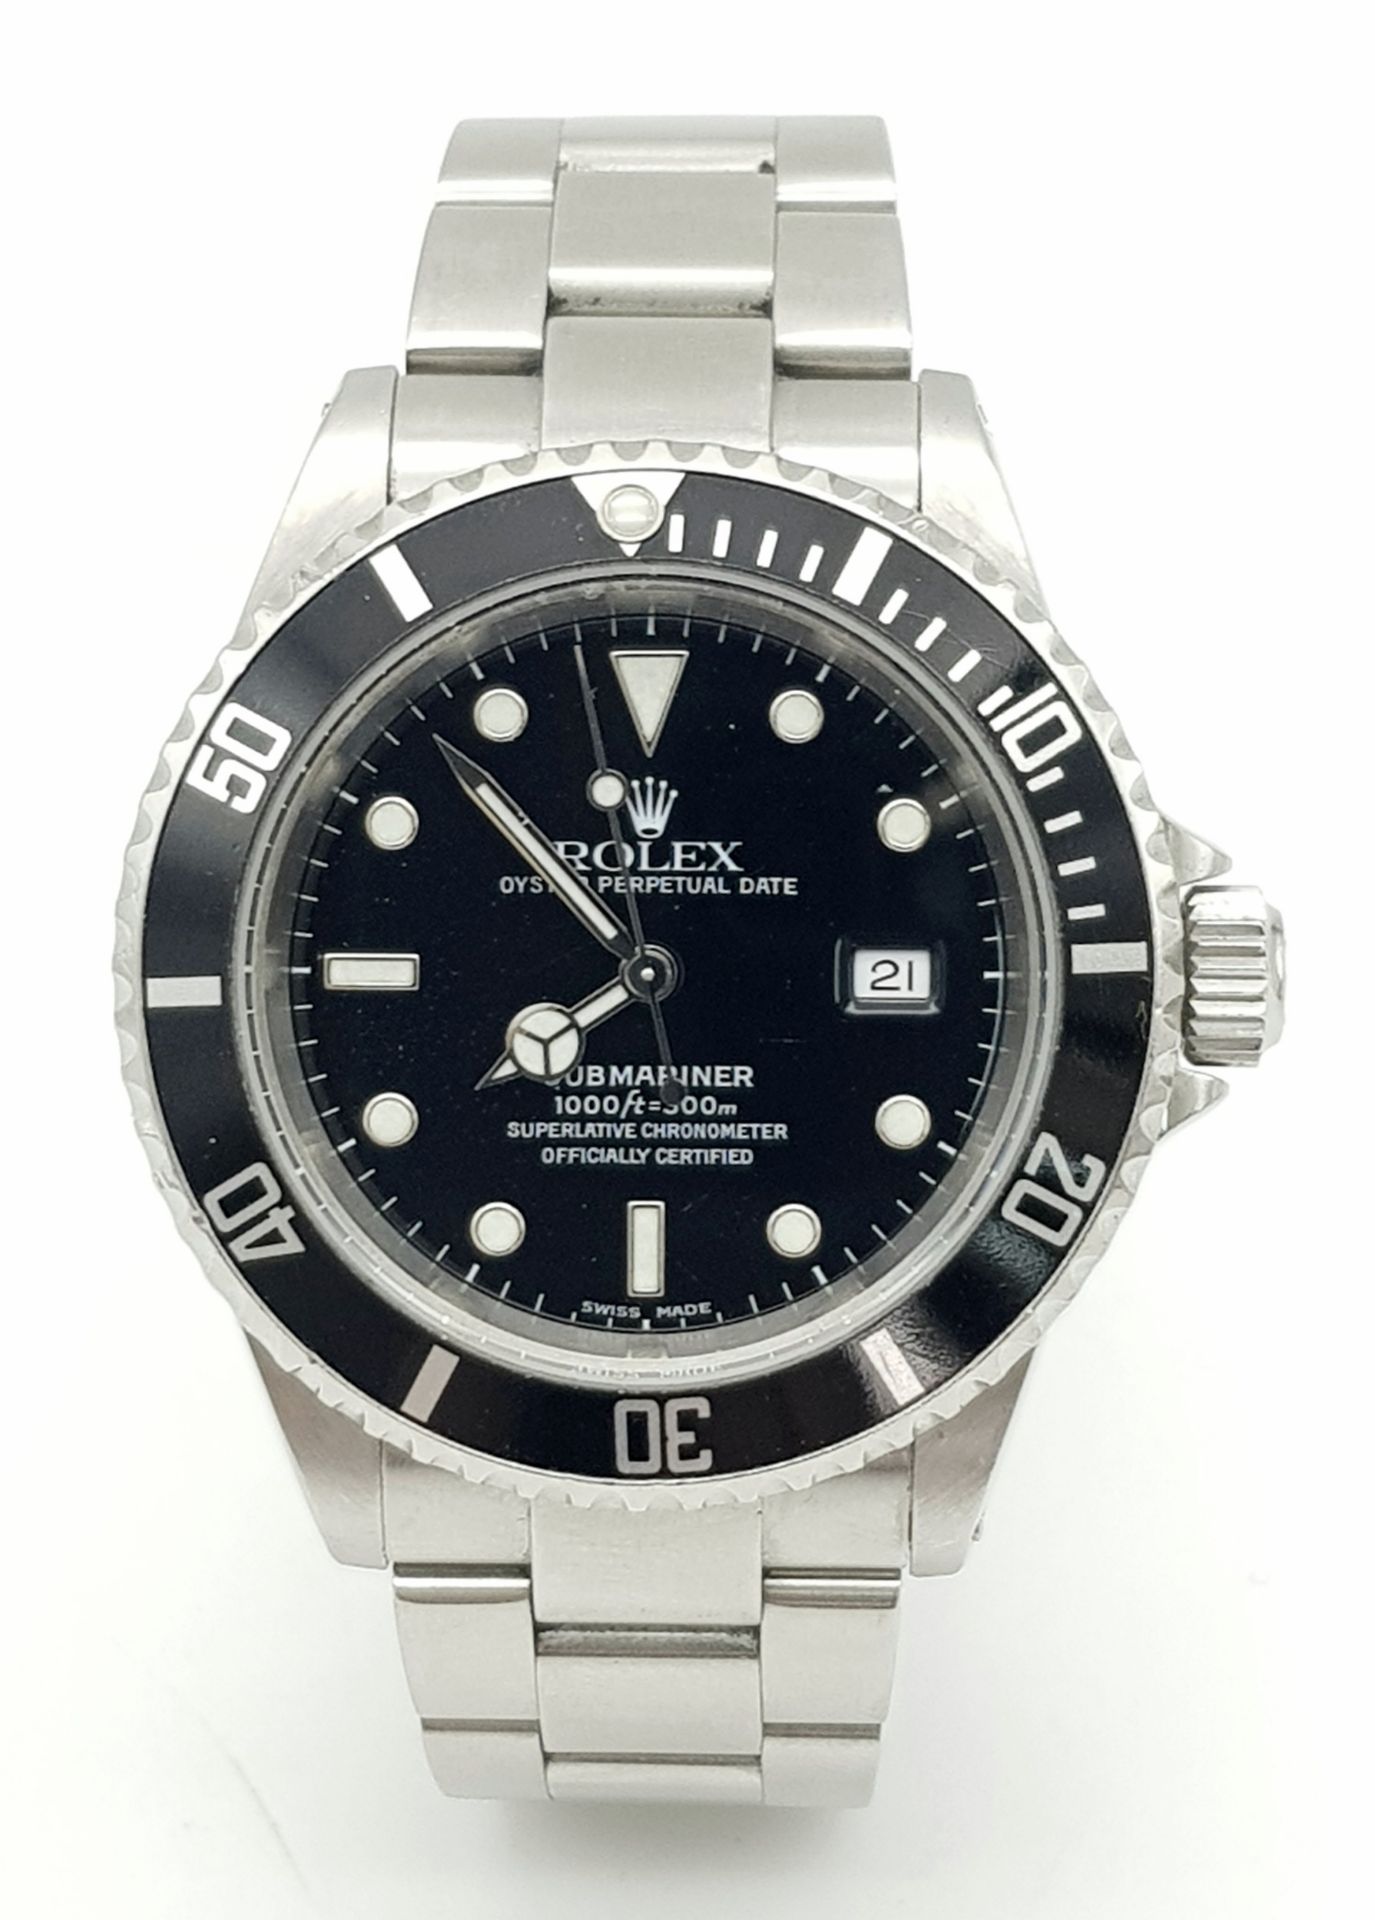 A Rolex Submariner Oyster Perpetual Date Watch. Stainless steel bracelet and case - 40mm. Black dial - Bild 2 aus 8